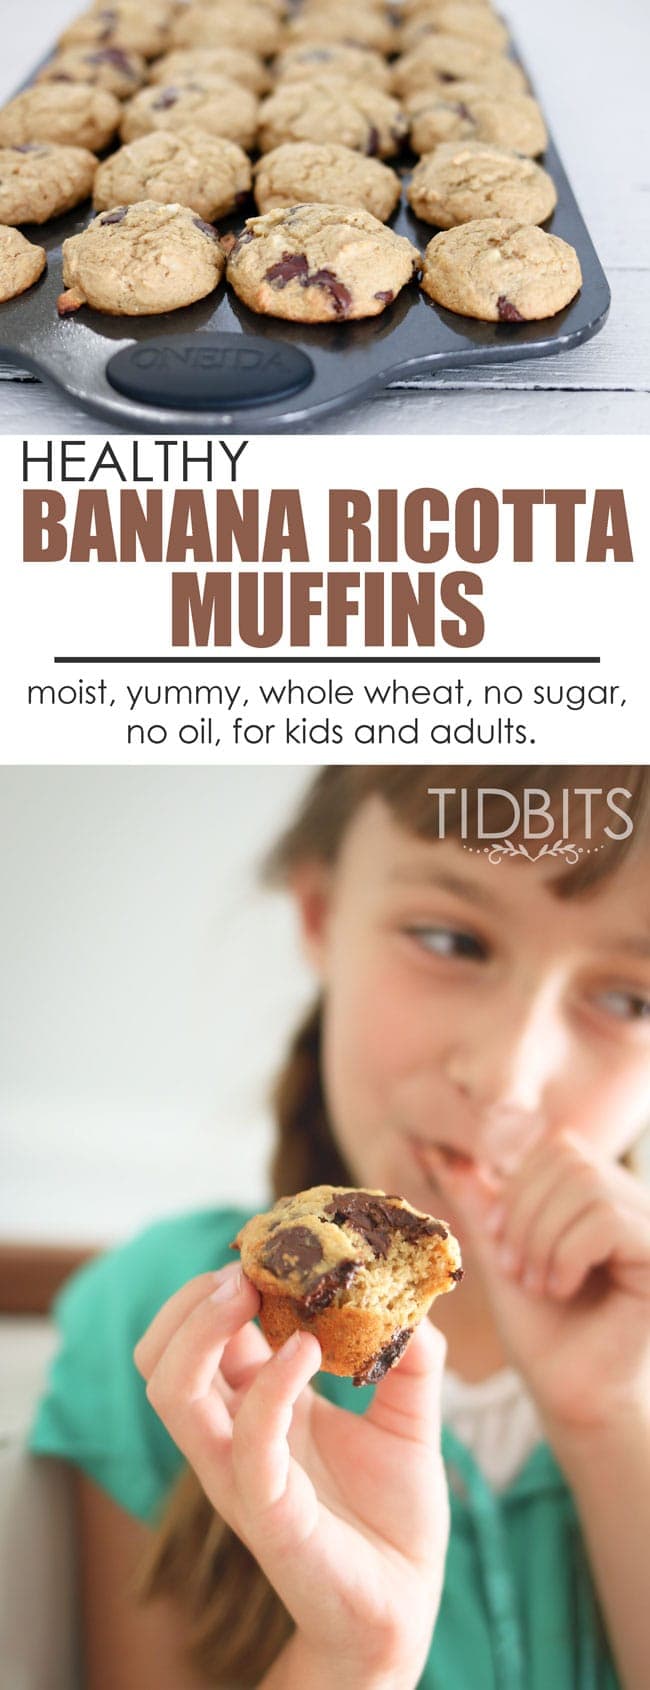 Healthy Banana Ricotta Muffins | These yummy, moist muffins are full of good things for kids and adults.  Made from whole wheat and ricotta cheese, minus any oils or sugar - you can whip these up and feel good eating them by the handfuls!